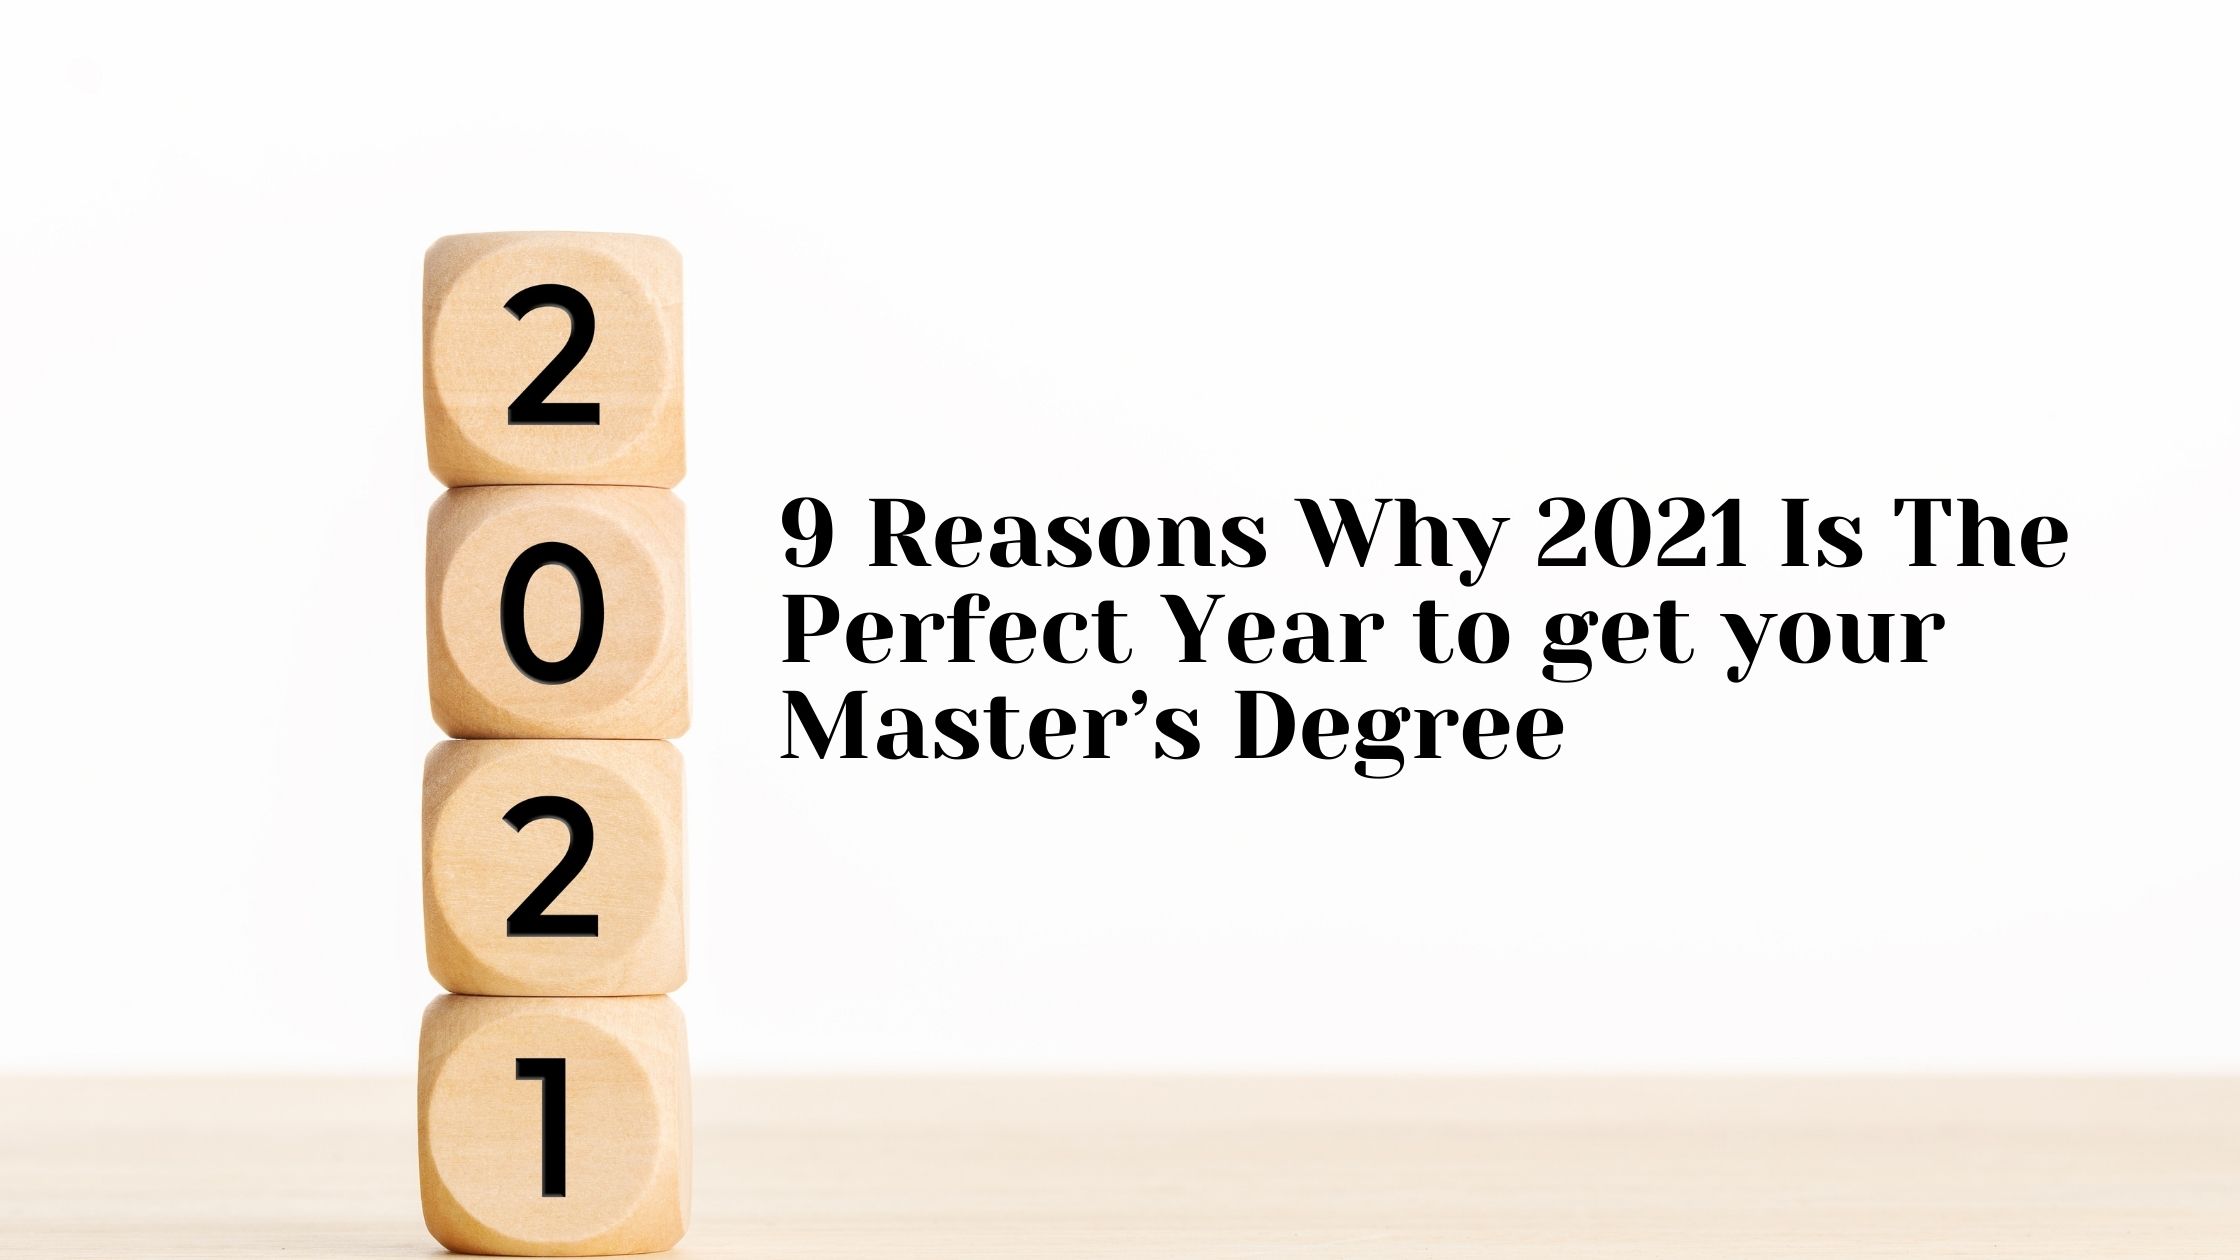 Picture of 9 Reasons Why 2021 Is the Perfect Year to get your Master’s Degree